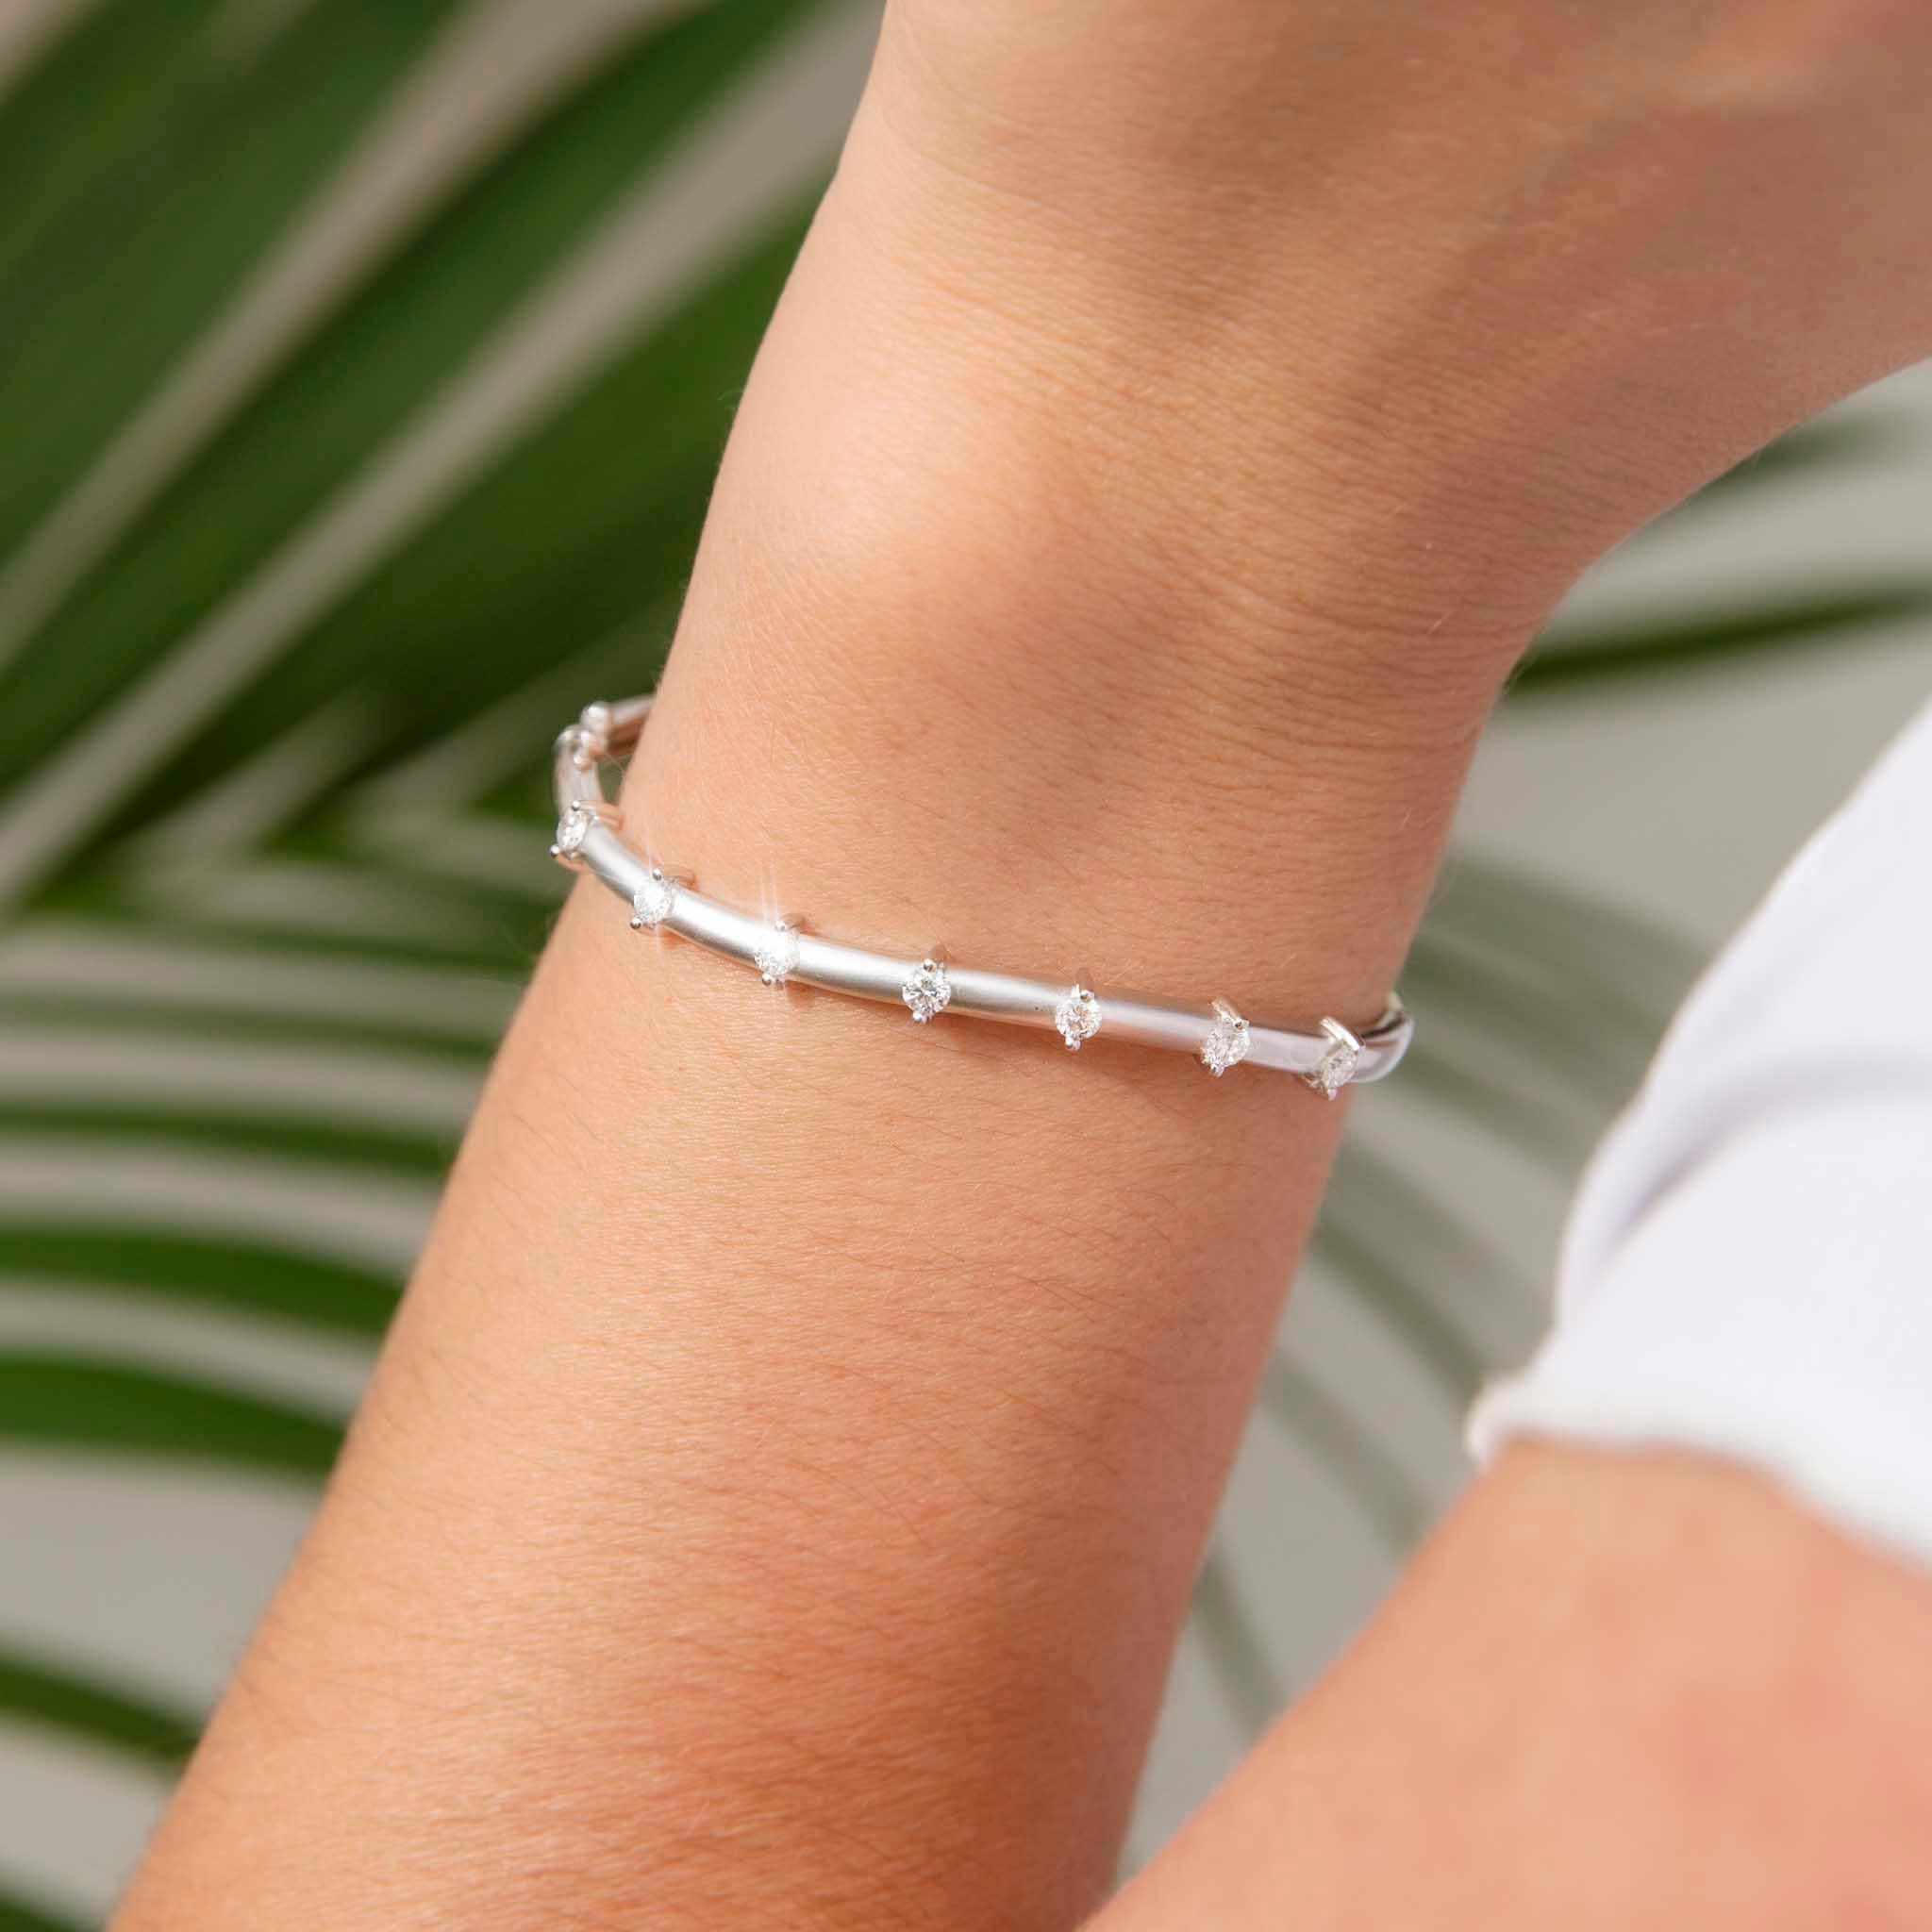 Forged in 18 carat white gold, this graceful contemporary hinged bangle features eight shimmering round brilliant diamonds across the front half, each set between minimalist bars. We have named her The Soleil Bangle. She is a fabulously elegant